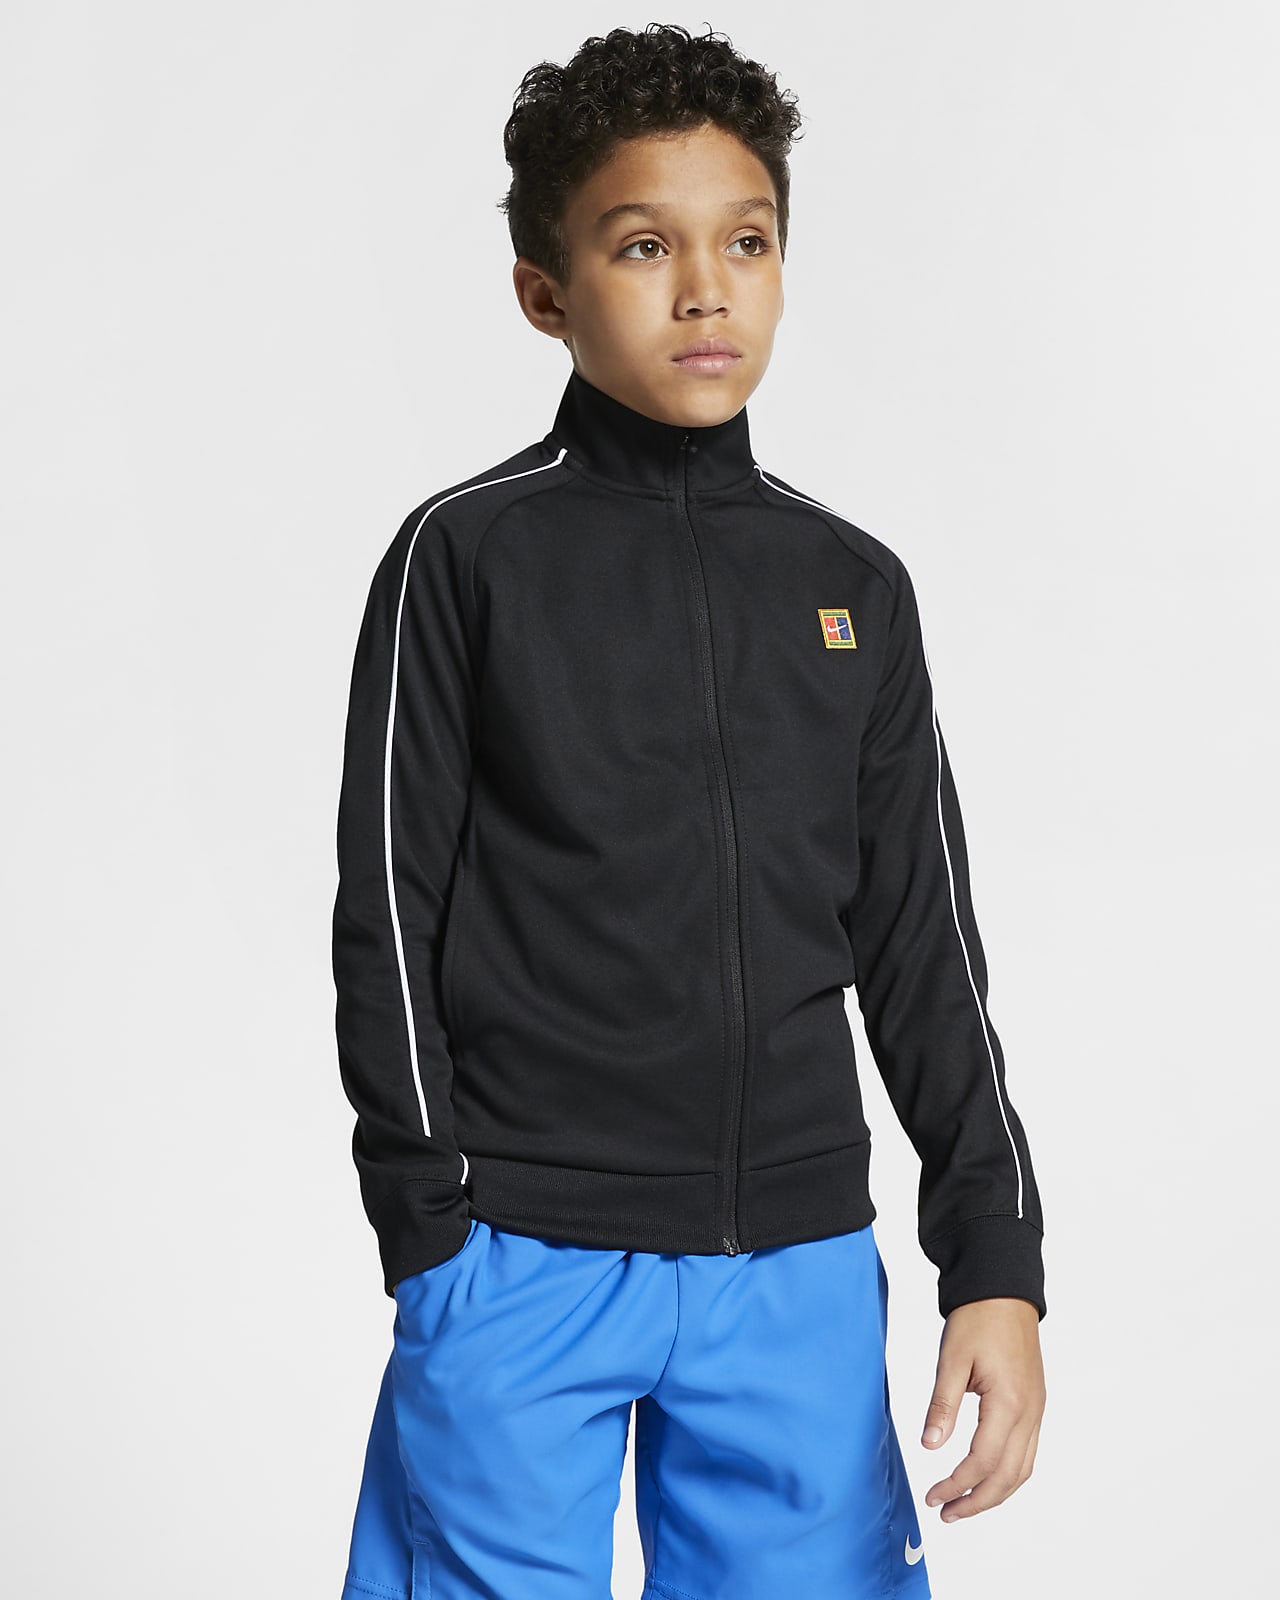 youth nike warm up suits